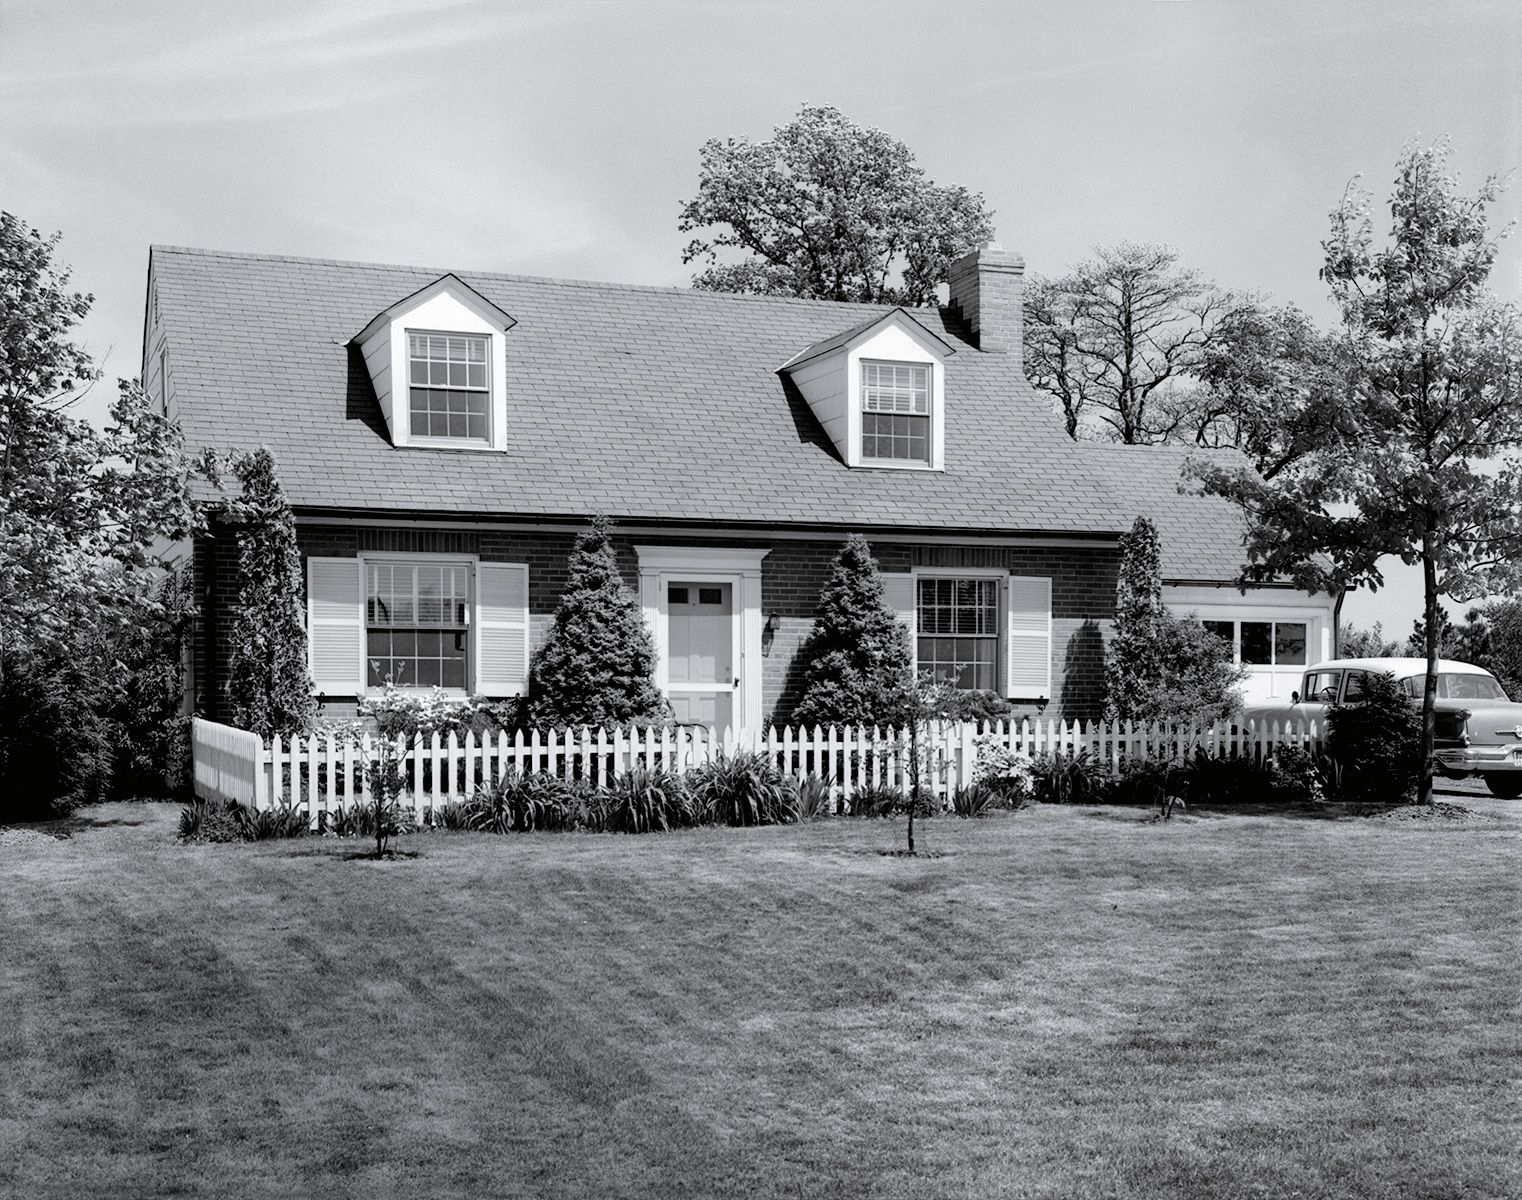 All About Picket Fences - This Old House